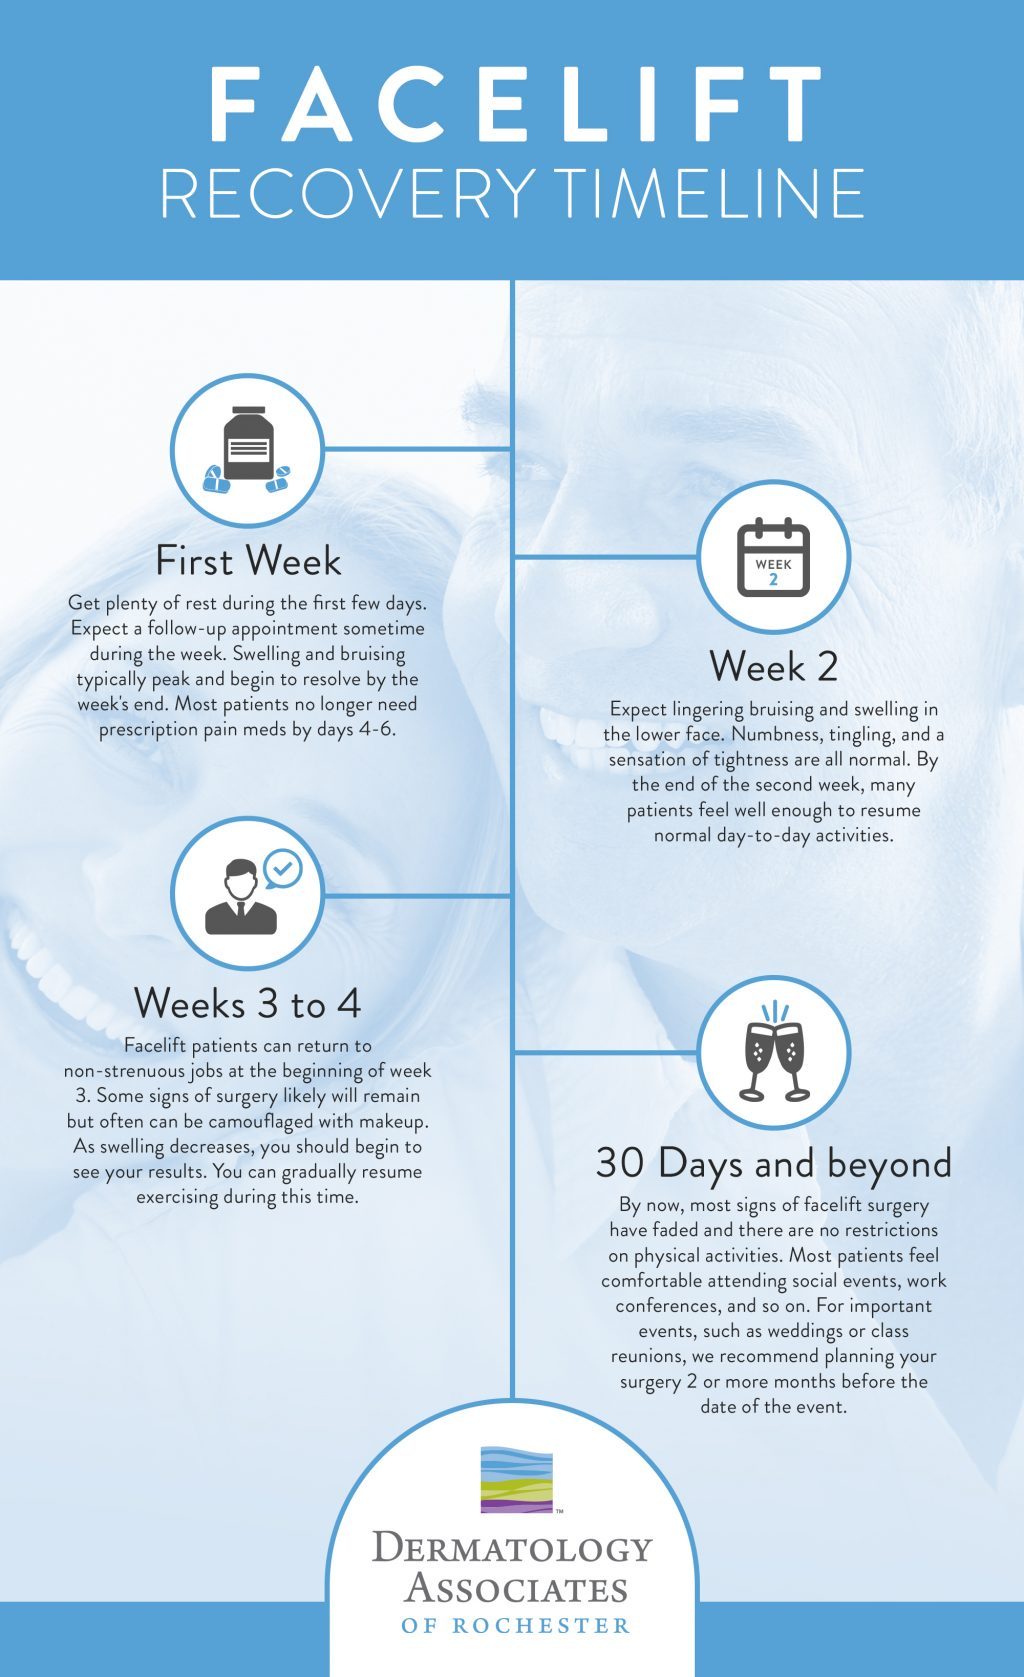 Facelift recovery timeline